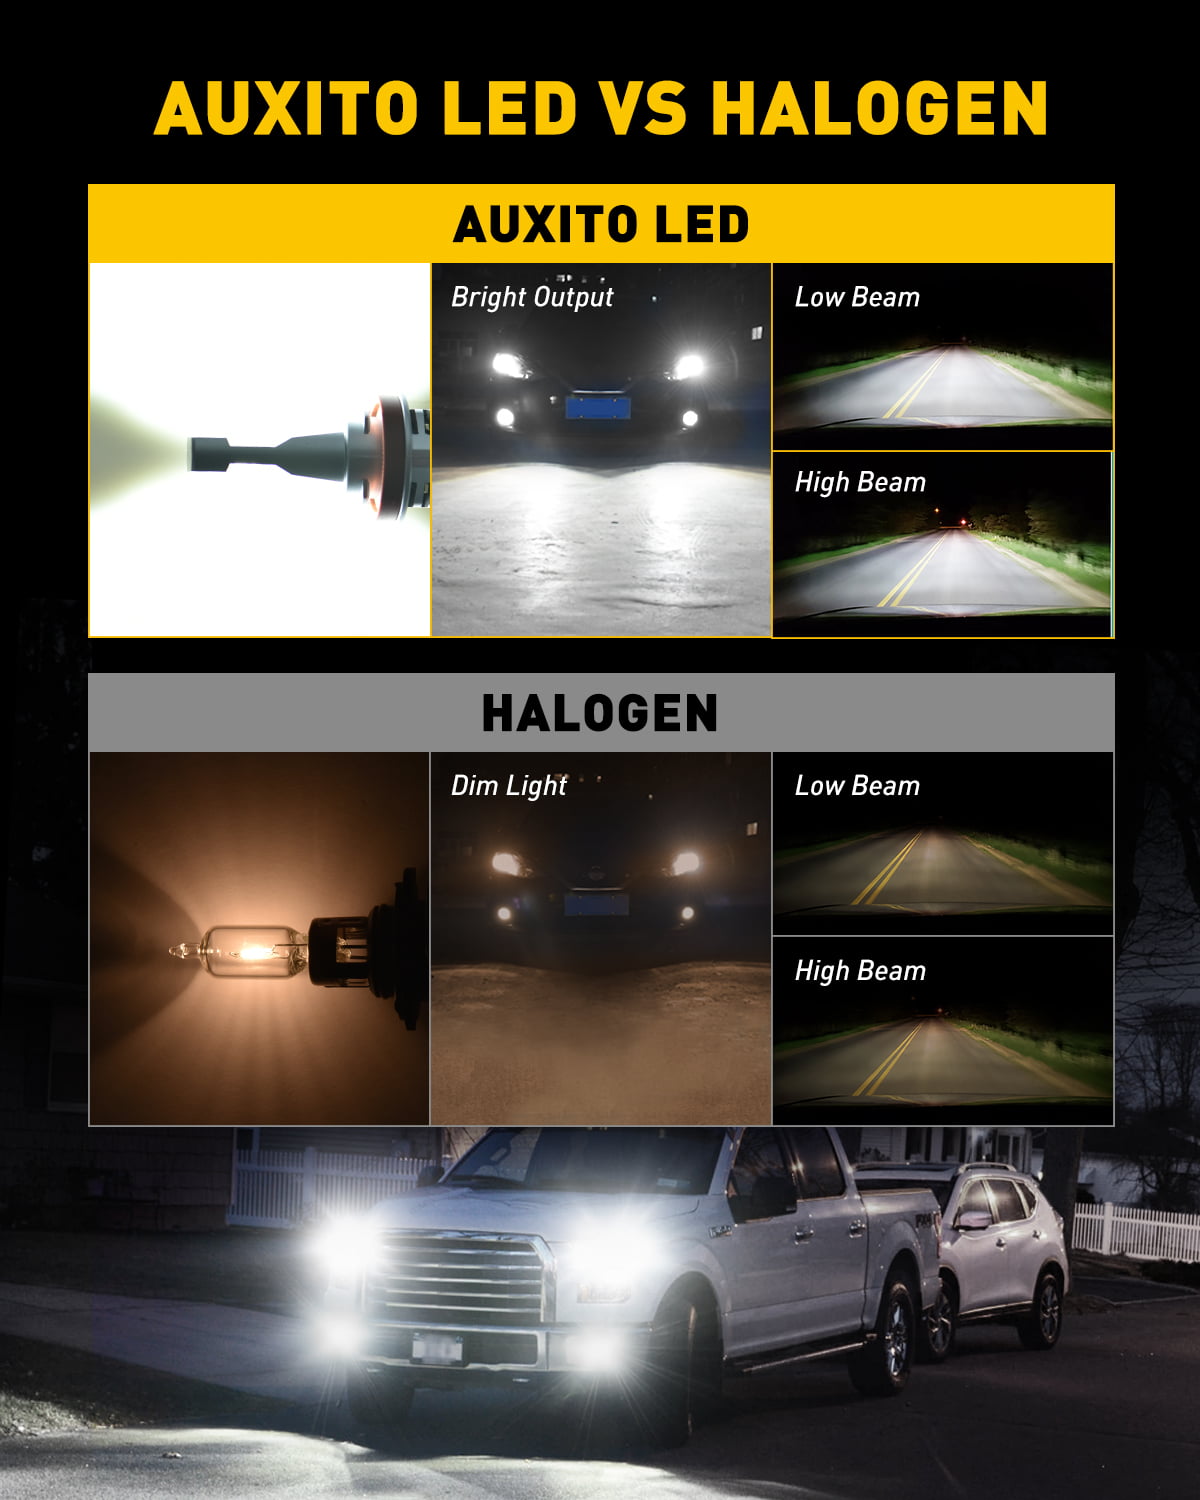 AUXITO H11 LED Bulbs, 120W 24000LM Per Set, 900% Brighter, 6500K Cool White  Adjustable H8 H9 LED Fog Light Bulb for Halogen Replacement, Plug and